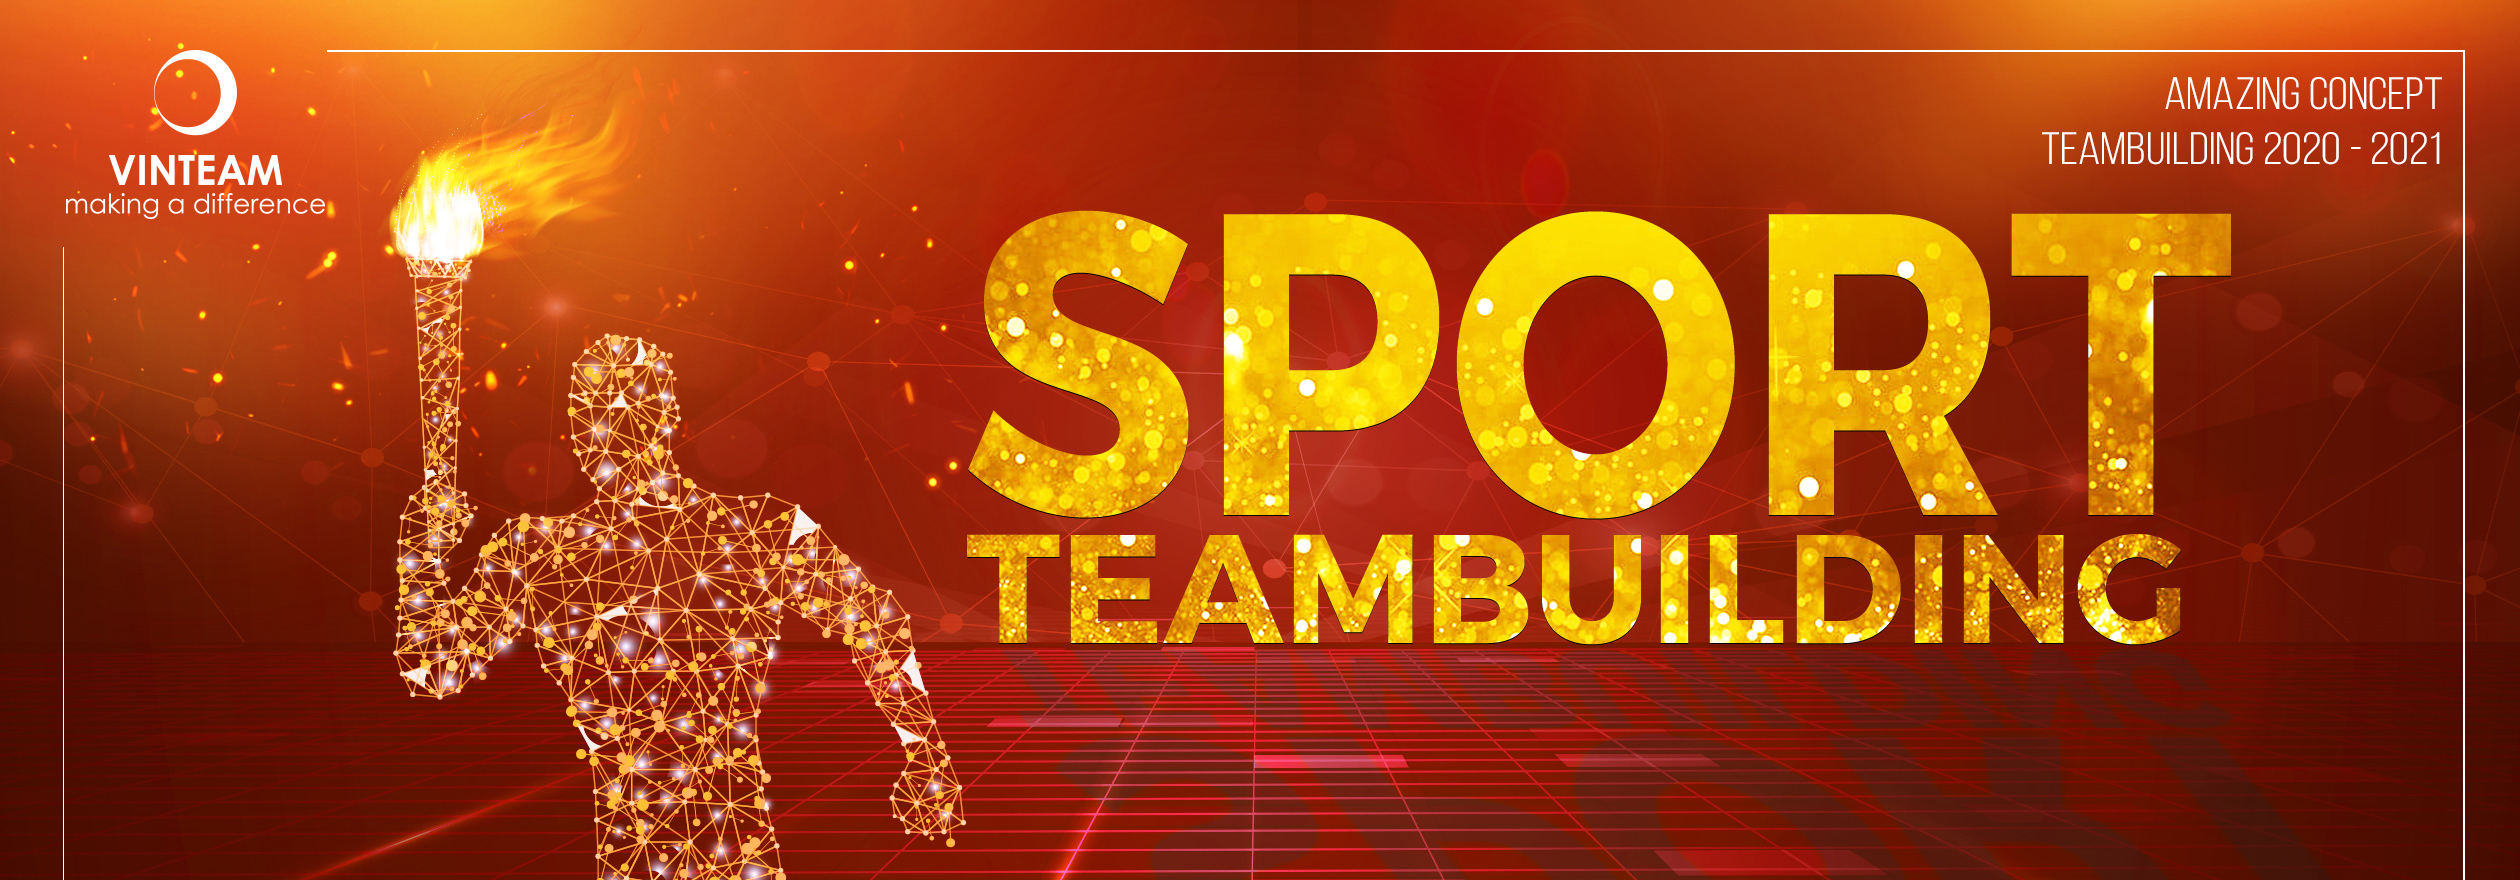 6-cover-SPORT-TEAMBUILDING